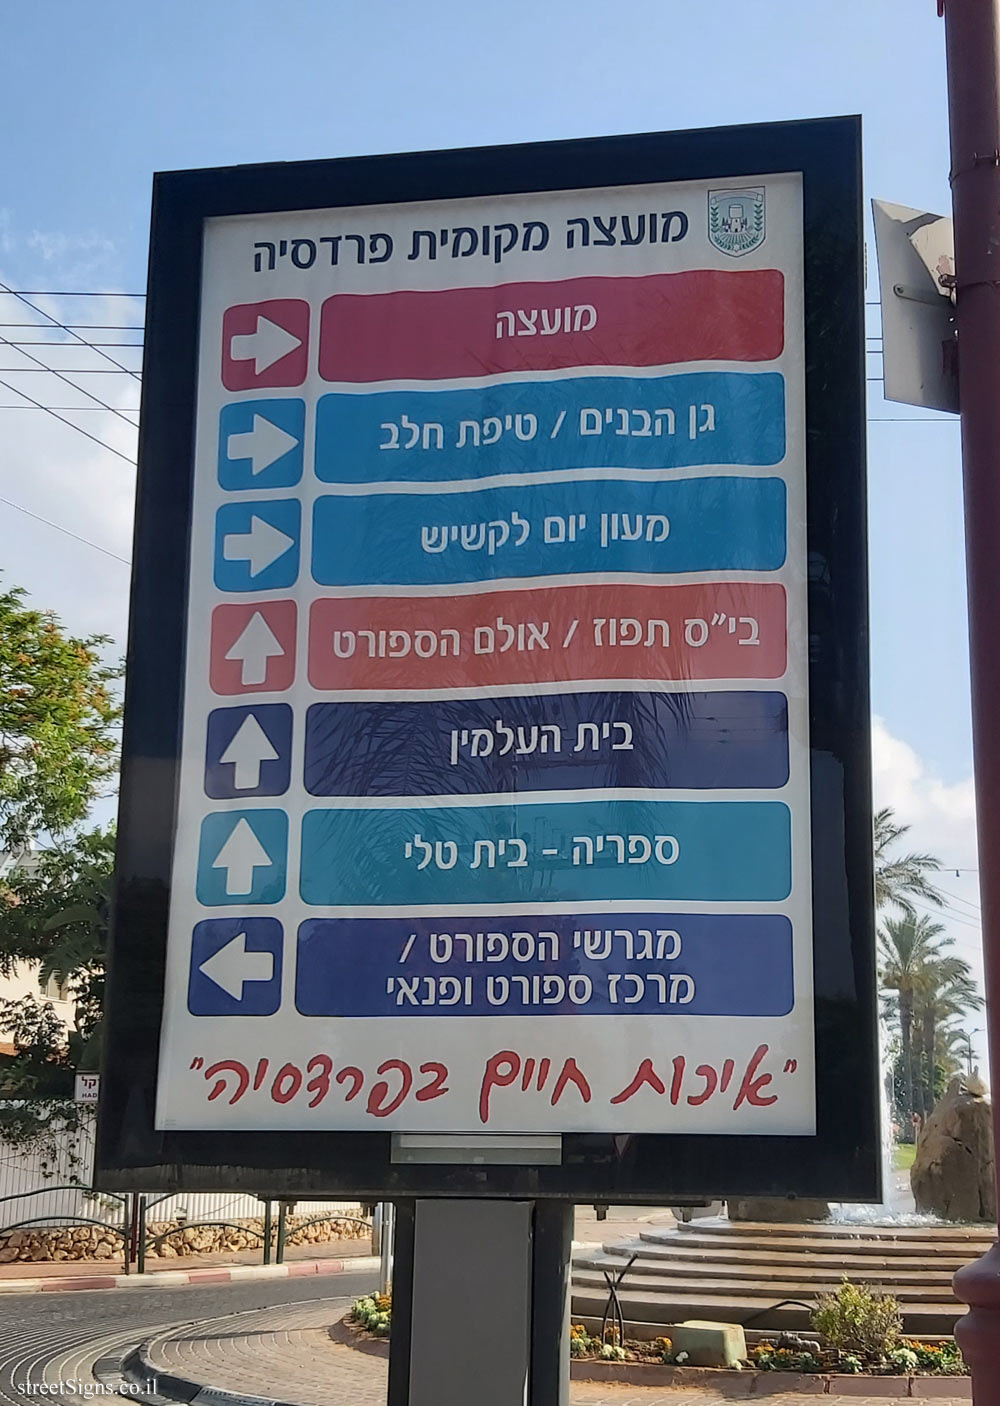 Pardesiya - A direction sign pointing to sites in the city